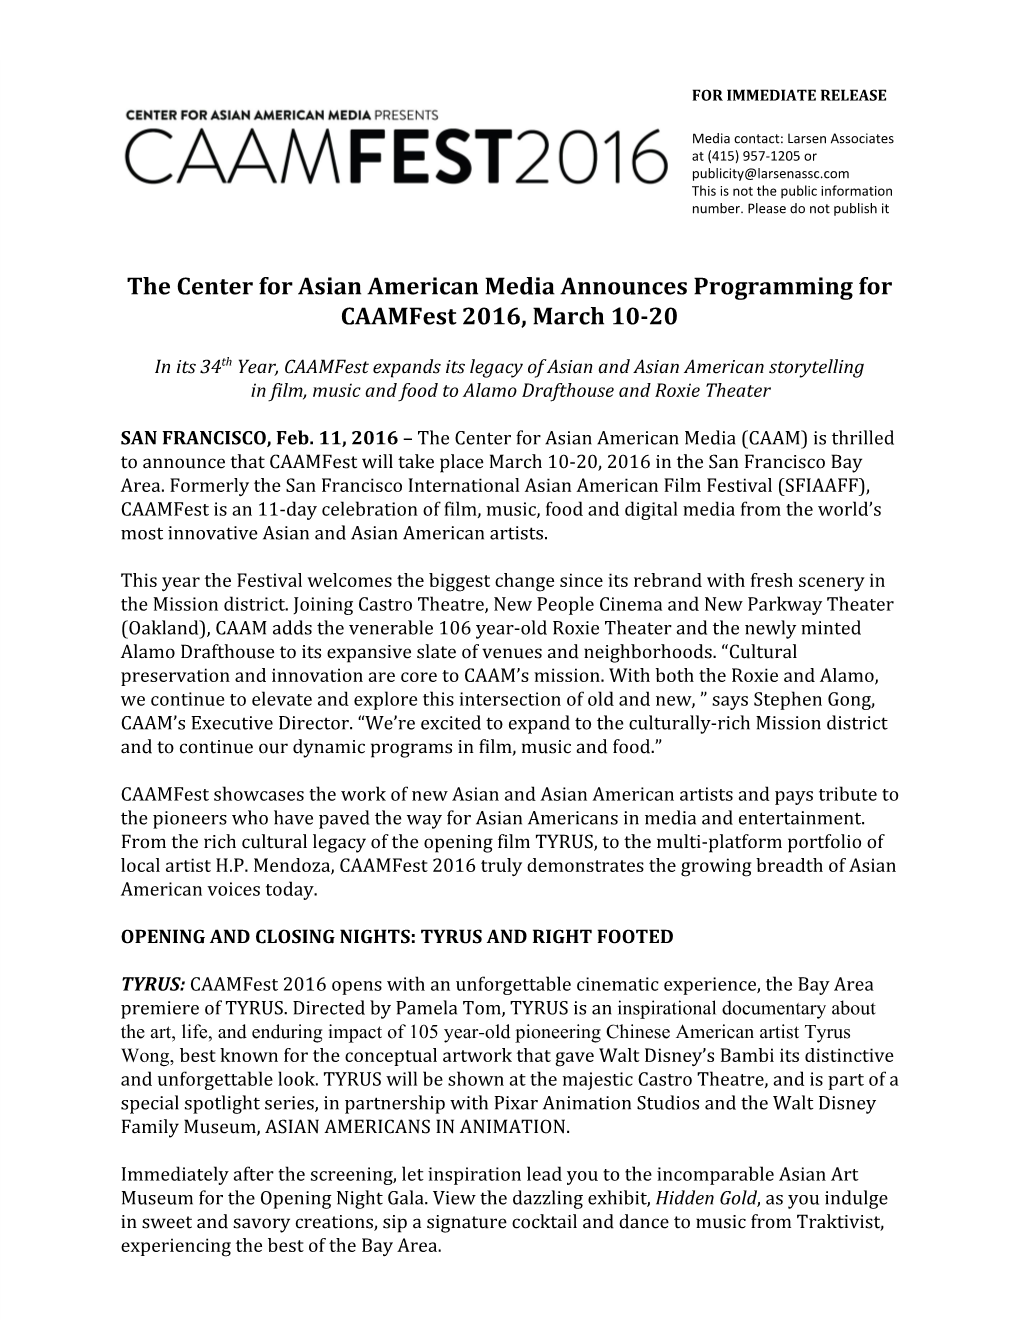 The Center for Asian American Media Announces Programming for Caamfest 2016, March 10­20